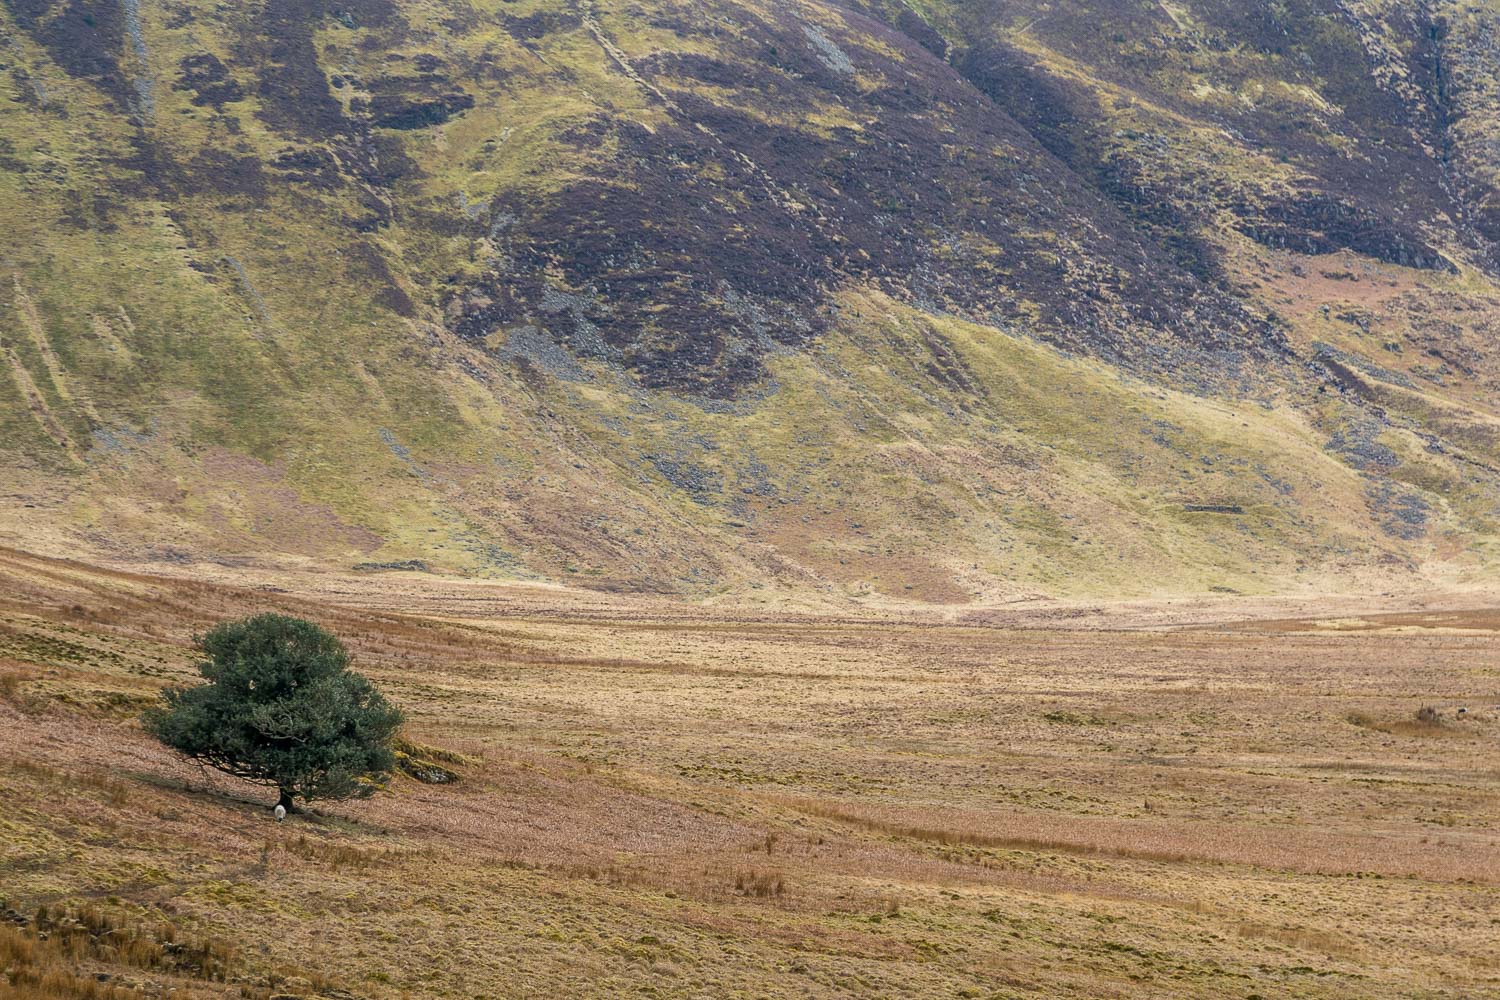 The Mosedale Holly Tree